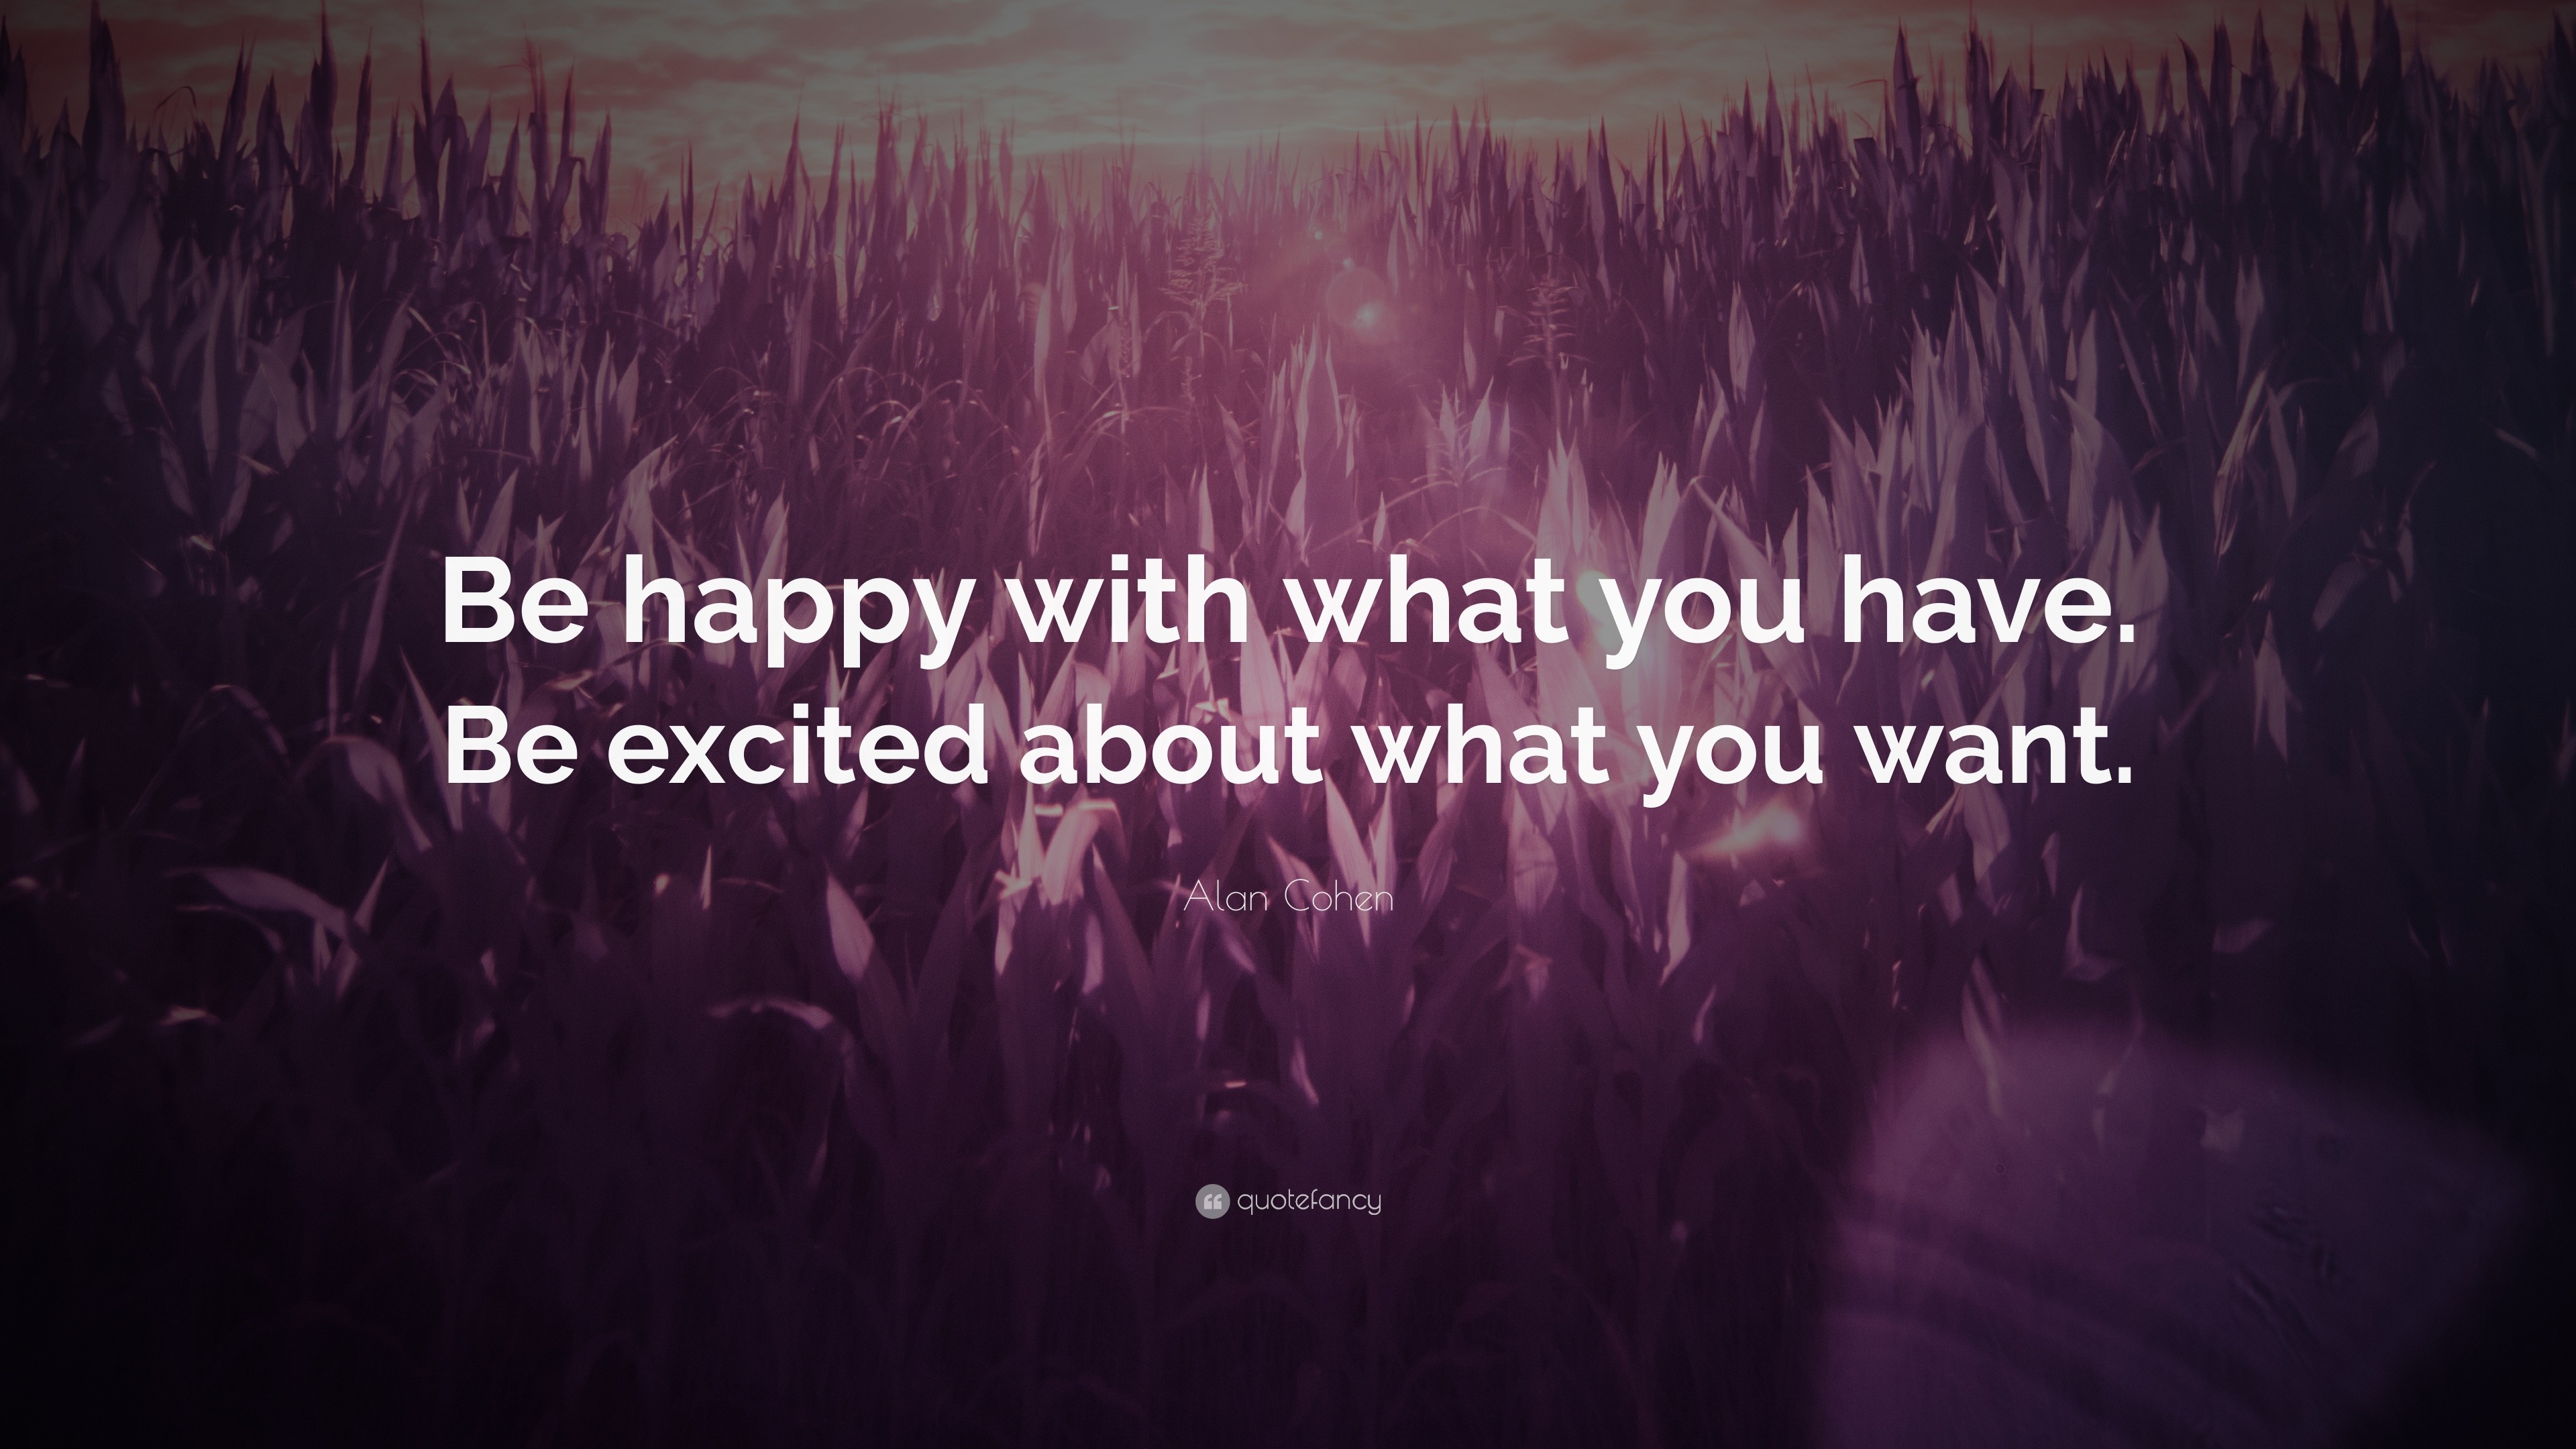 Alan Cohen Quote: “Be happy with what you have. Be excited about what ...